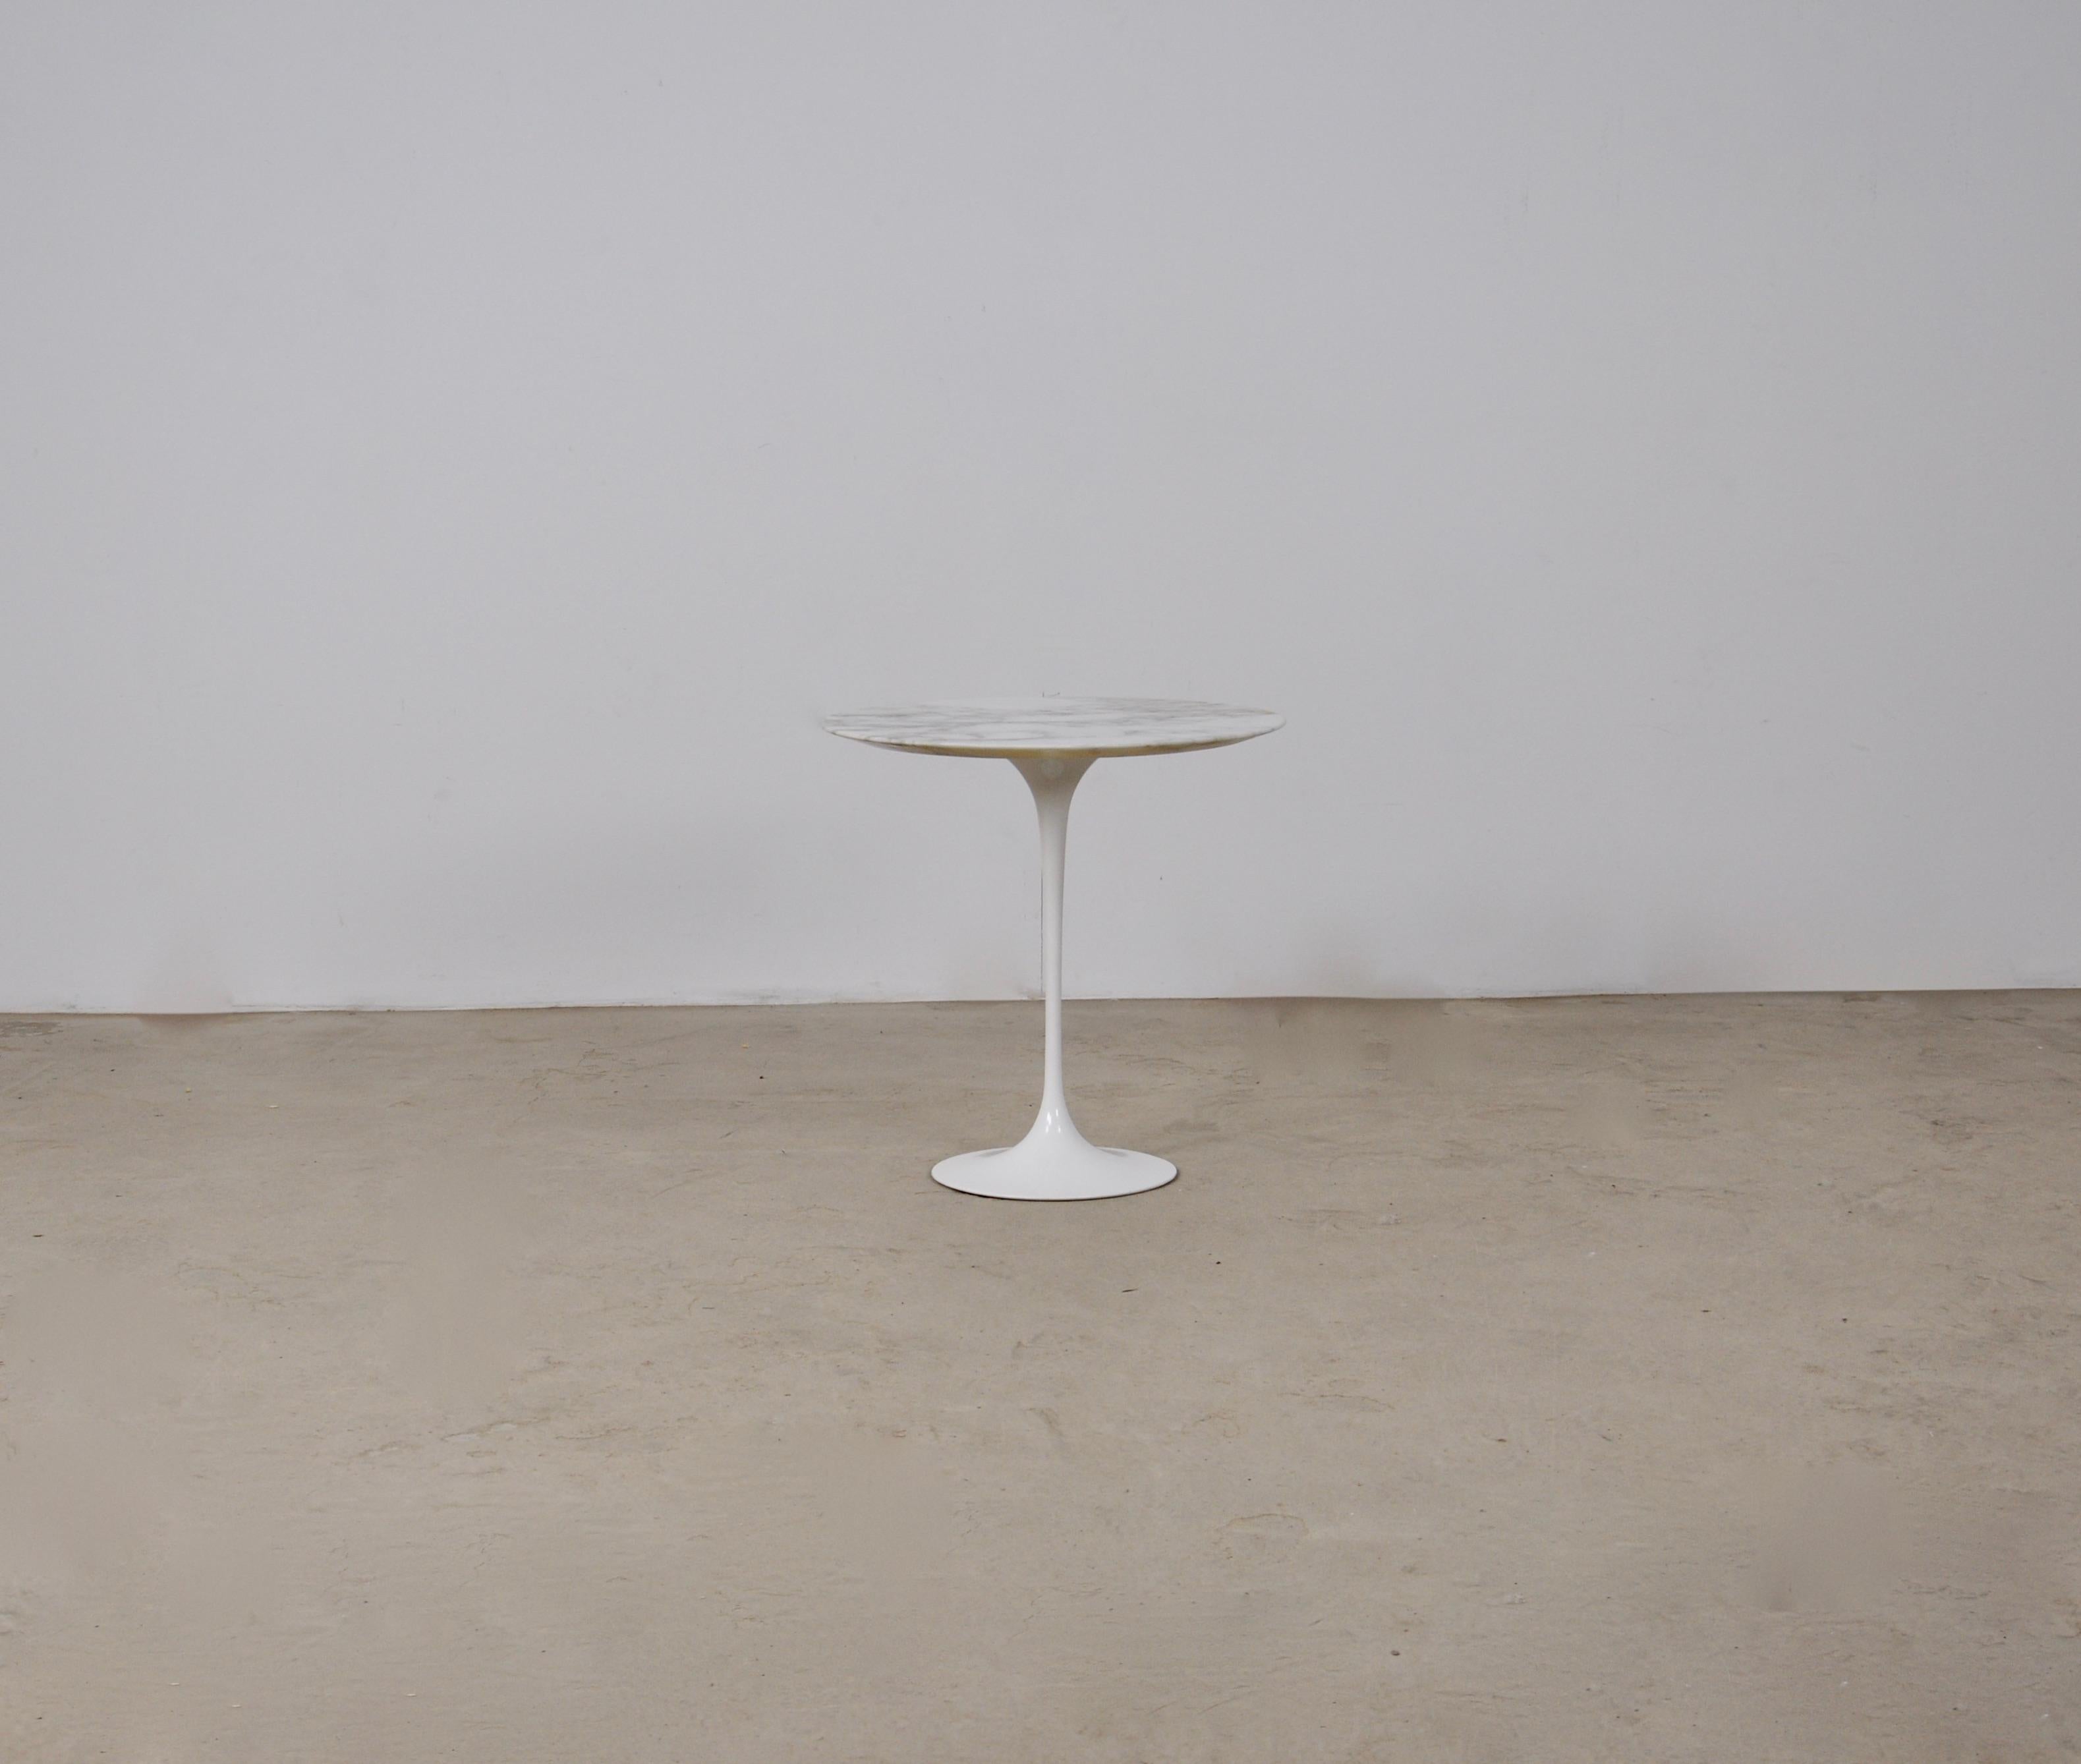 Marble and metal side table by eero saarinen. Wear due to time and age of the table.